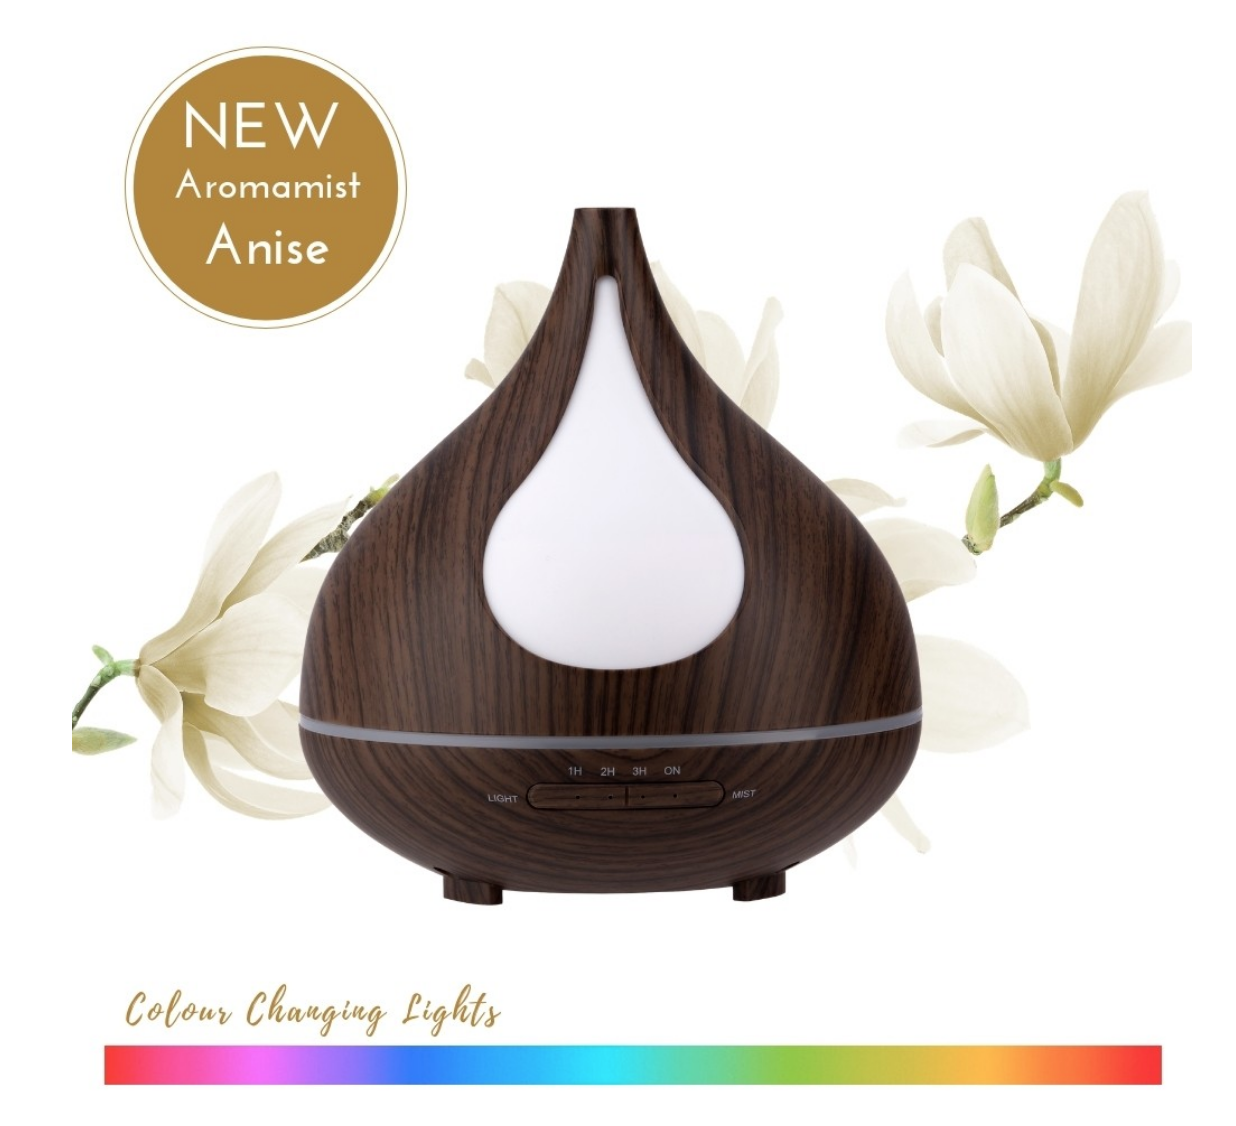 Aromatherapy Ultrasonic Mist Diffuser -Colour Changing Lights RRP$95.00 BPA FREE